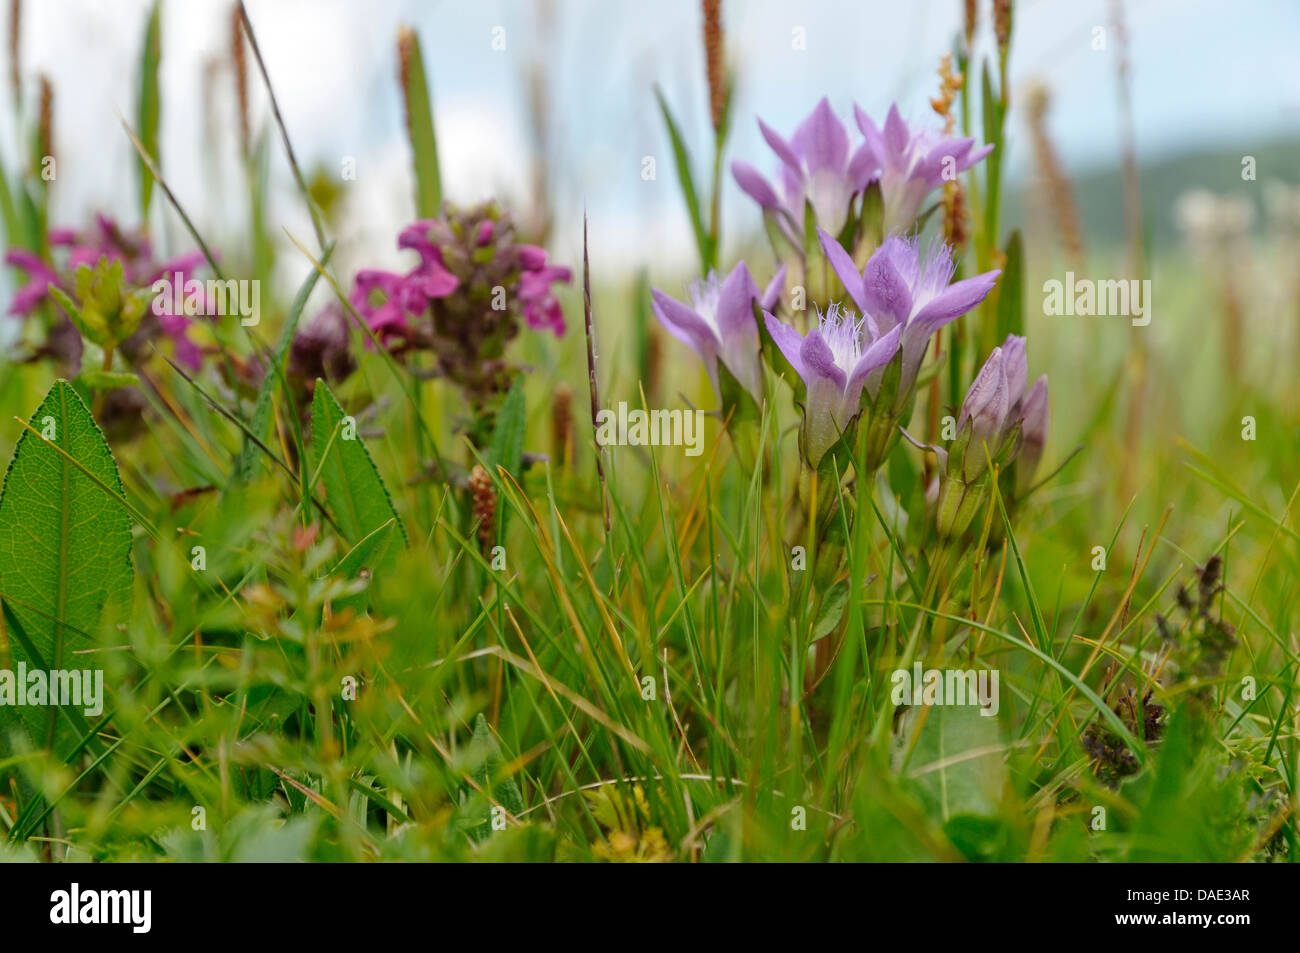 German Gentian, Chiltern Gentian (Gentiana germanica, Gentianella germanica), blooming in a meadoq with Prunella, Italy Stock Photo